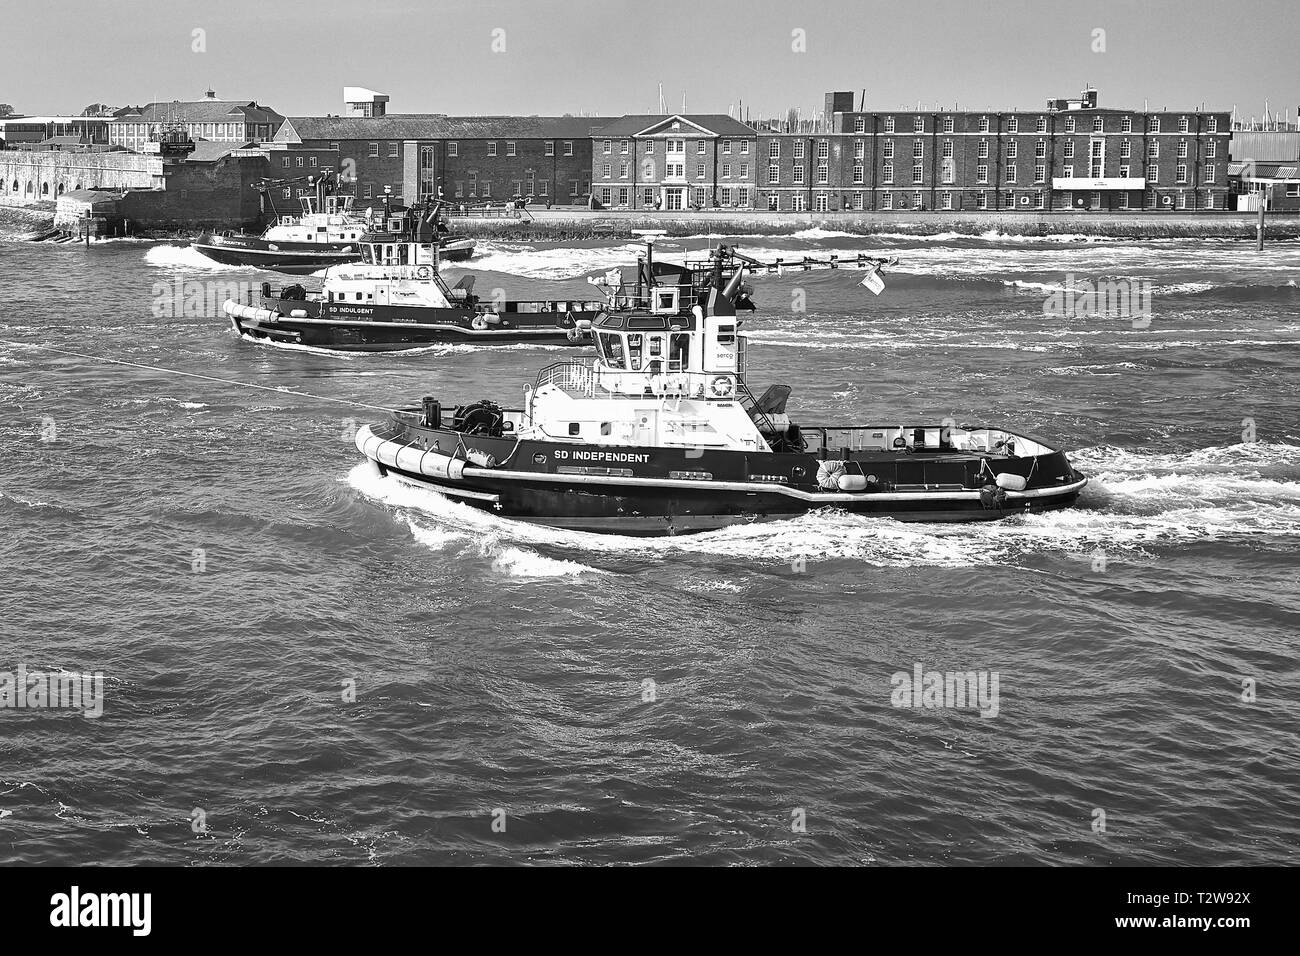 Black And White Photo Of 3 SERCO LTD, Tugs Assisting The Royal Navy Aircraft Carrier, HMS QUEEN ELIZABETH As She Departs Portsmouth Harbour, UK Stock Photo